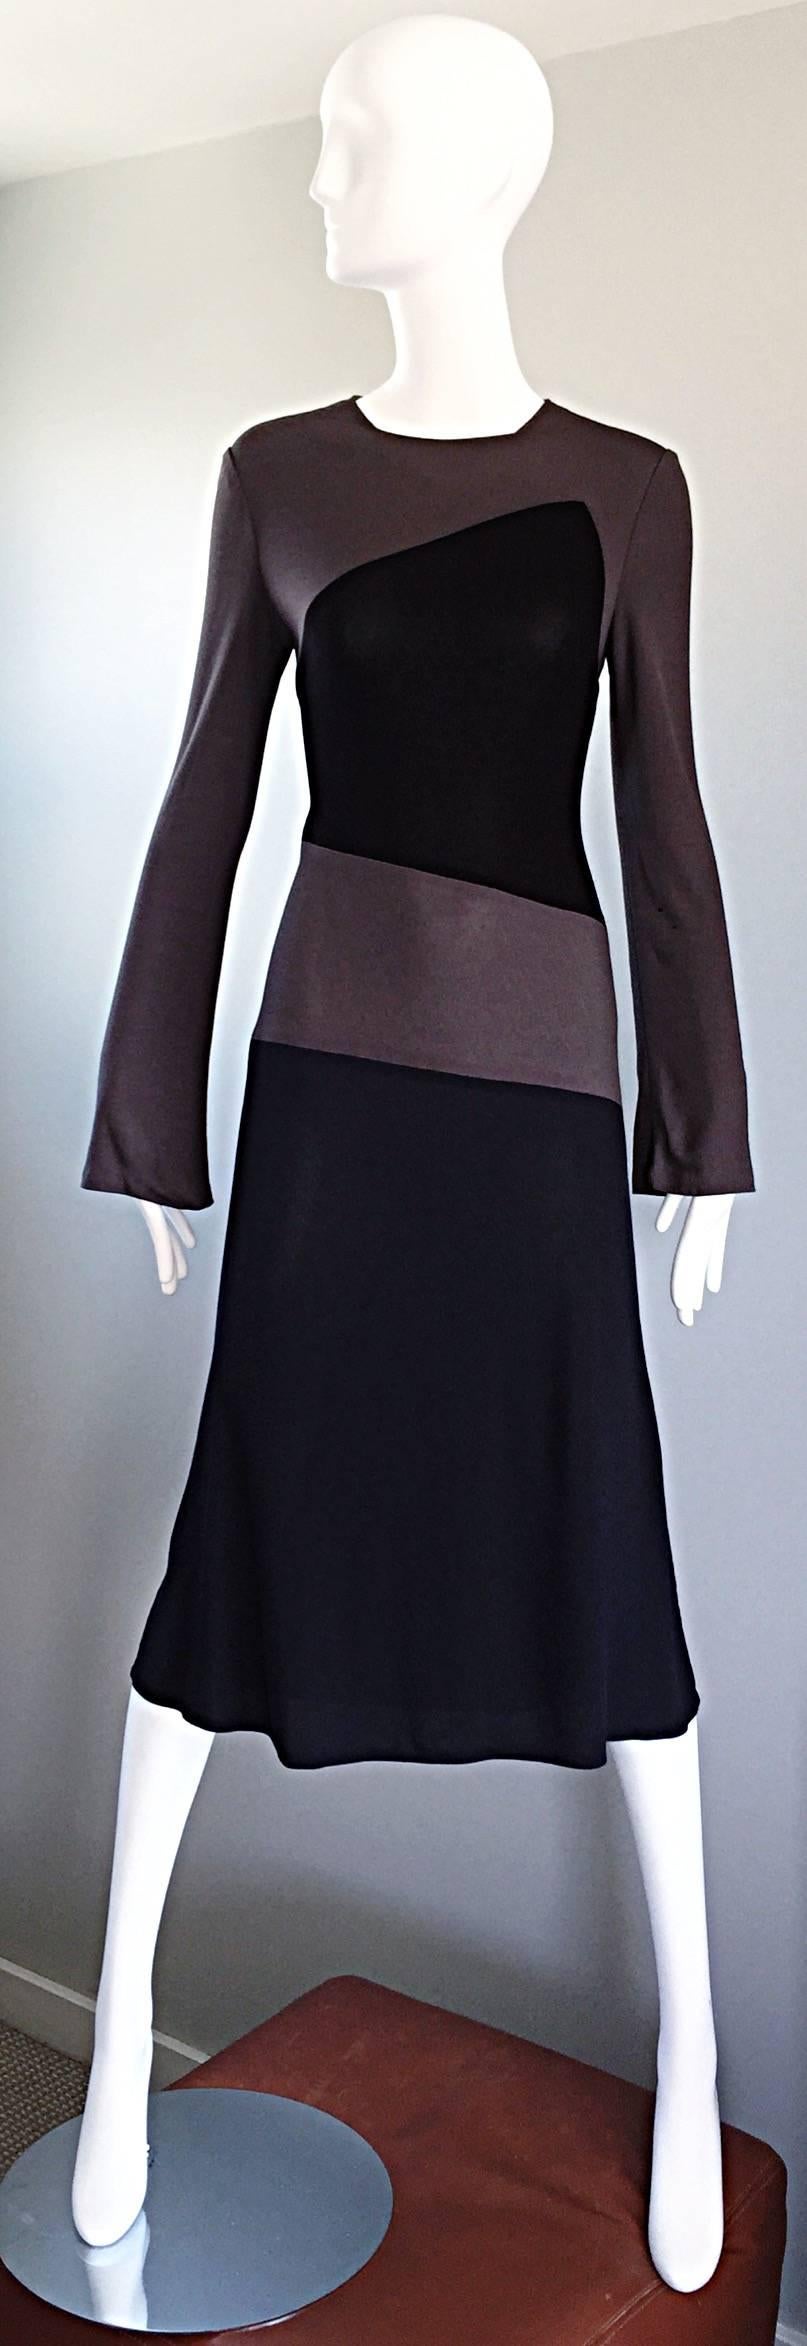 Amazing vintage 90s CALVIN KLEIN COLLECTION black and taupe gray colorblock Avant Garde dress! Amazing double layered silk jersey fabric clings to the body perfectly! Tailor fitted bell sleeves. Hidden zipper up the side with hook-and-eye closure.